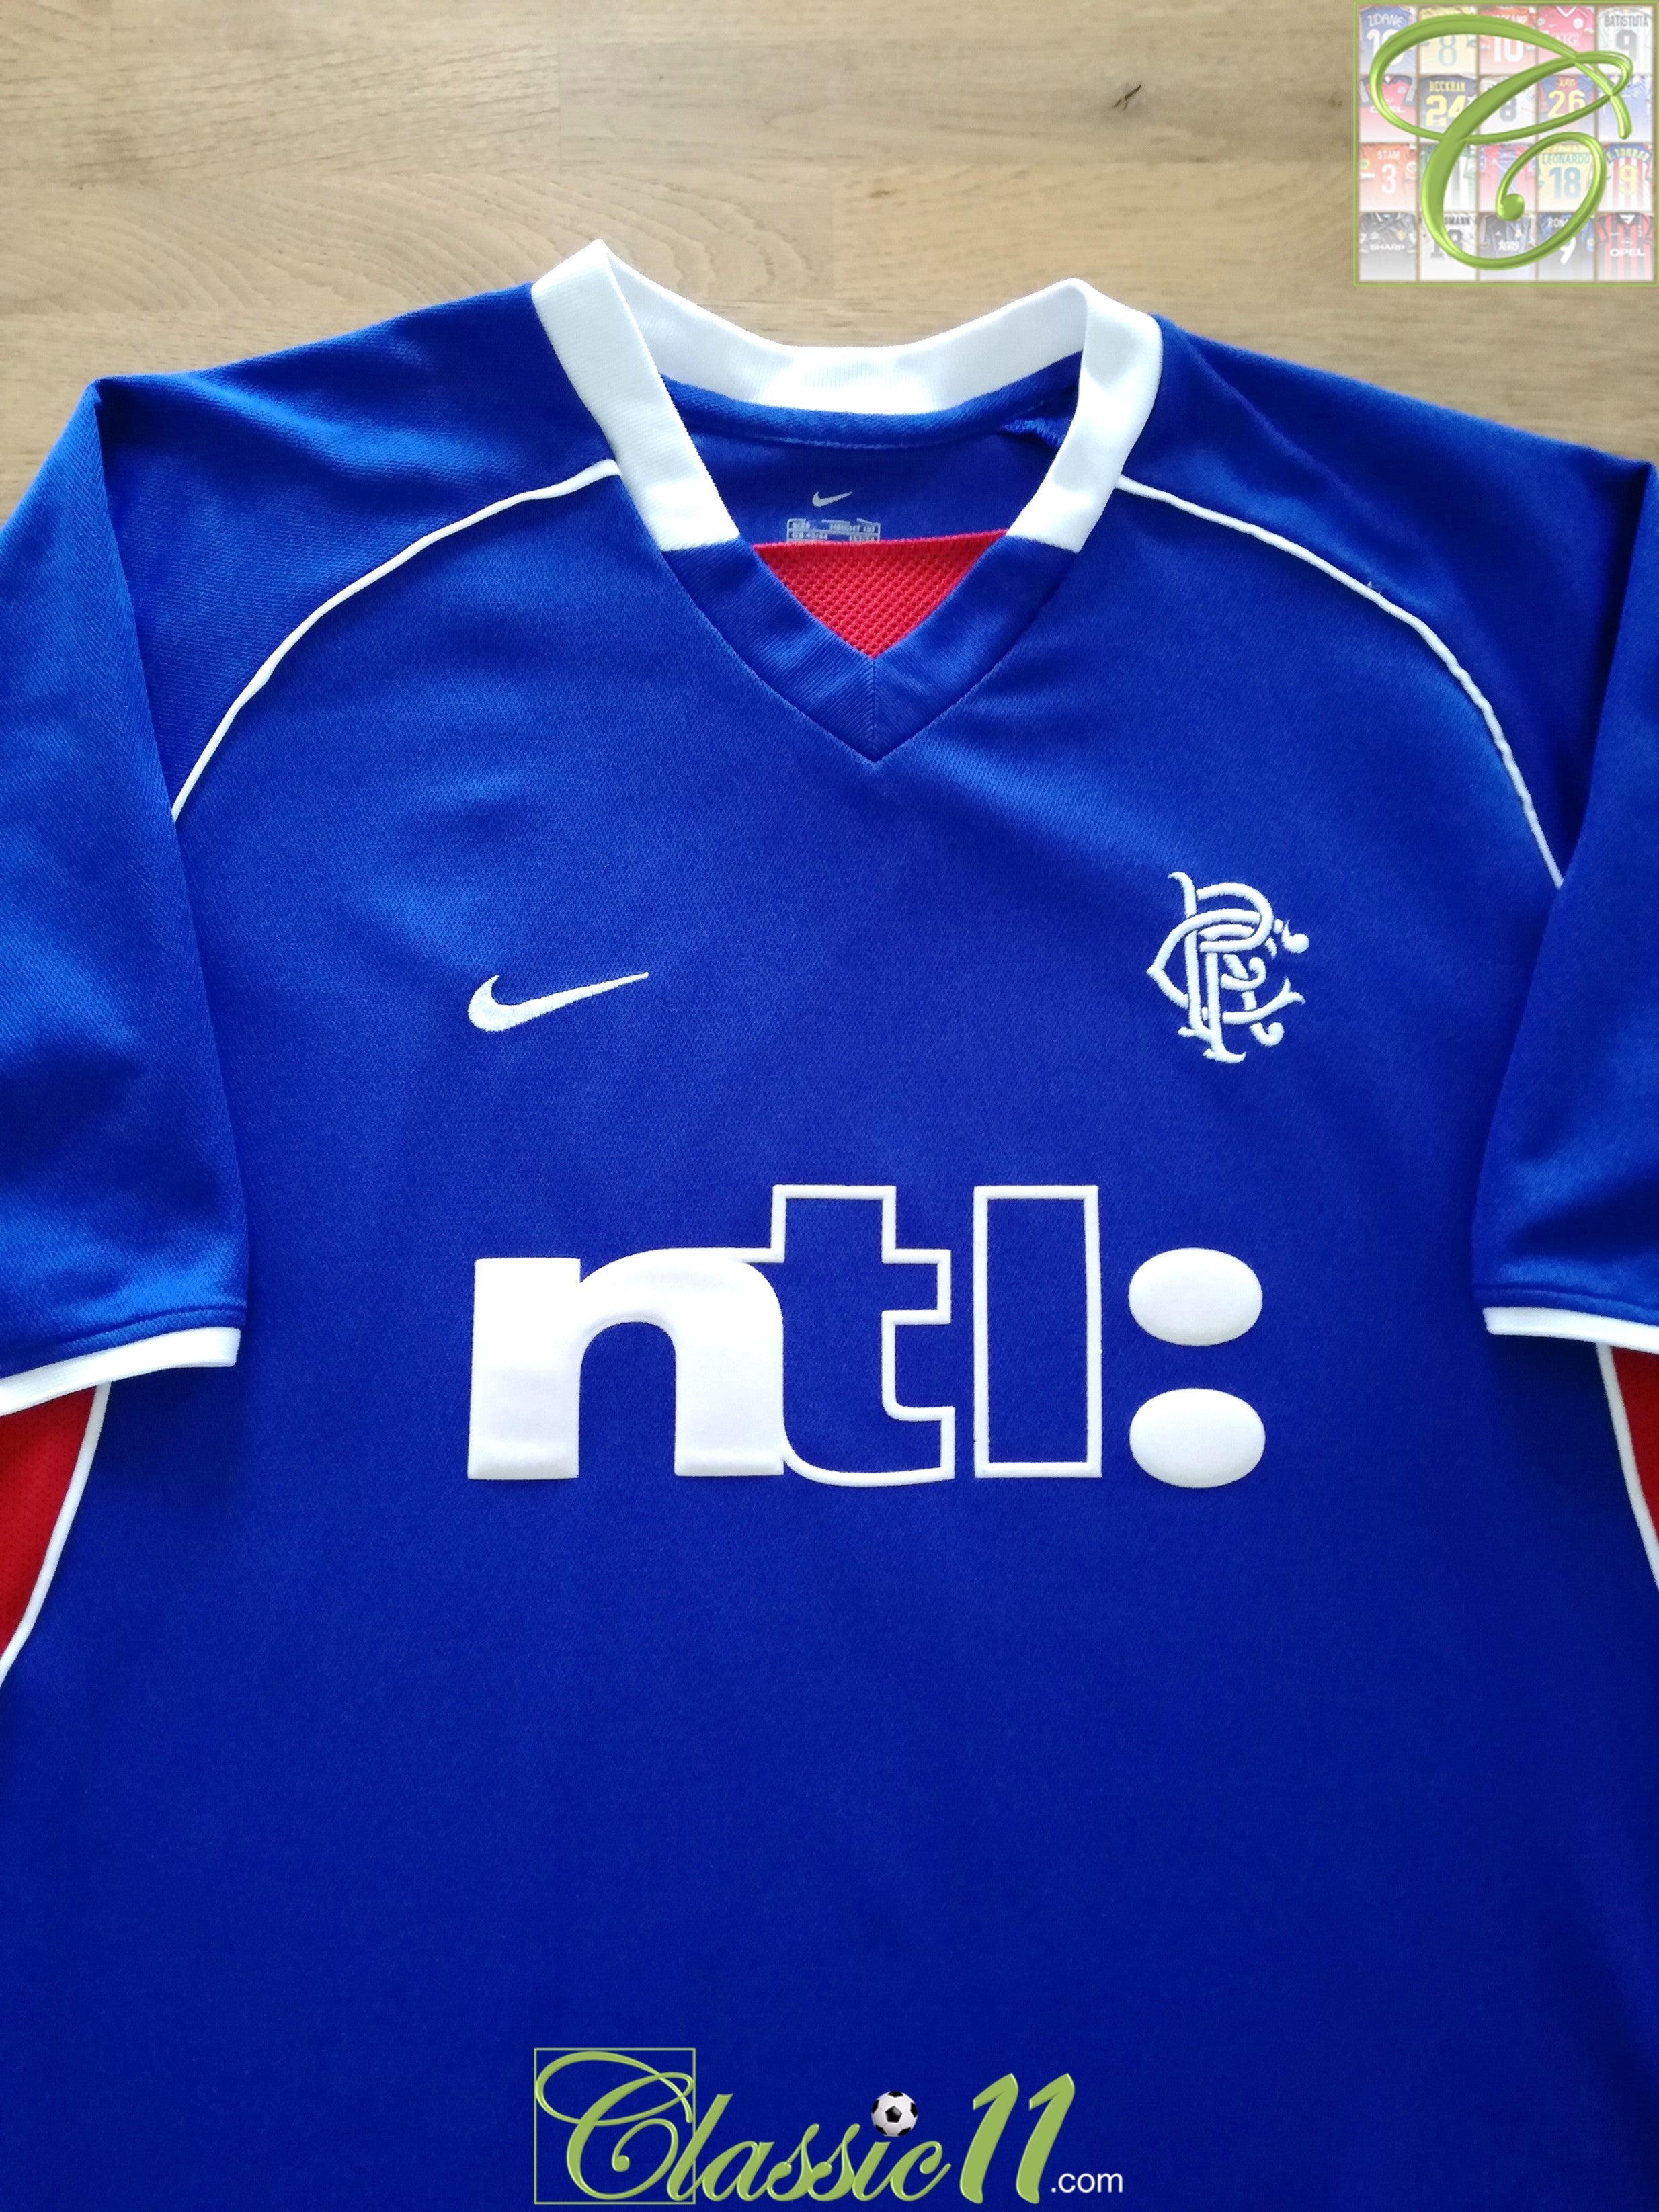 2001/02 Rangers Home Football Shirt / Old Official Vintage Nike